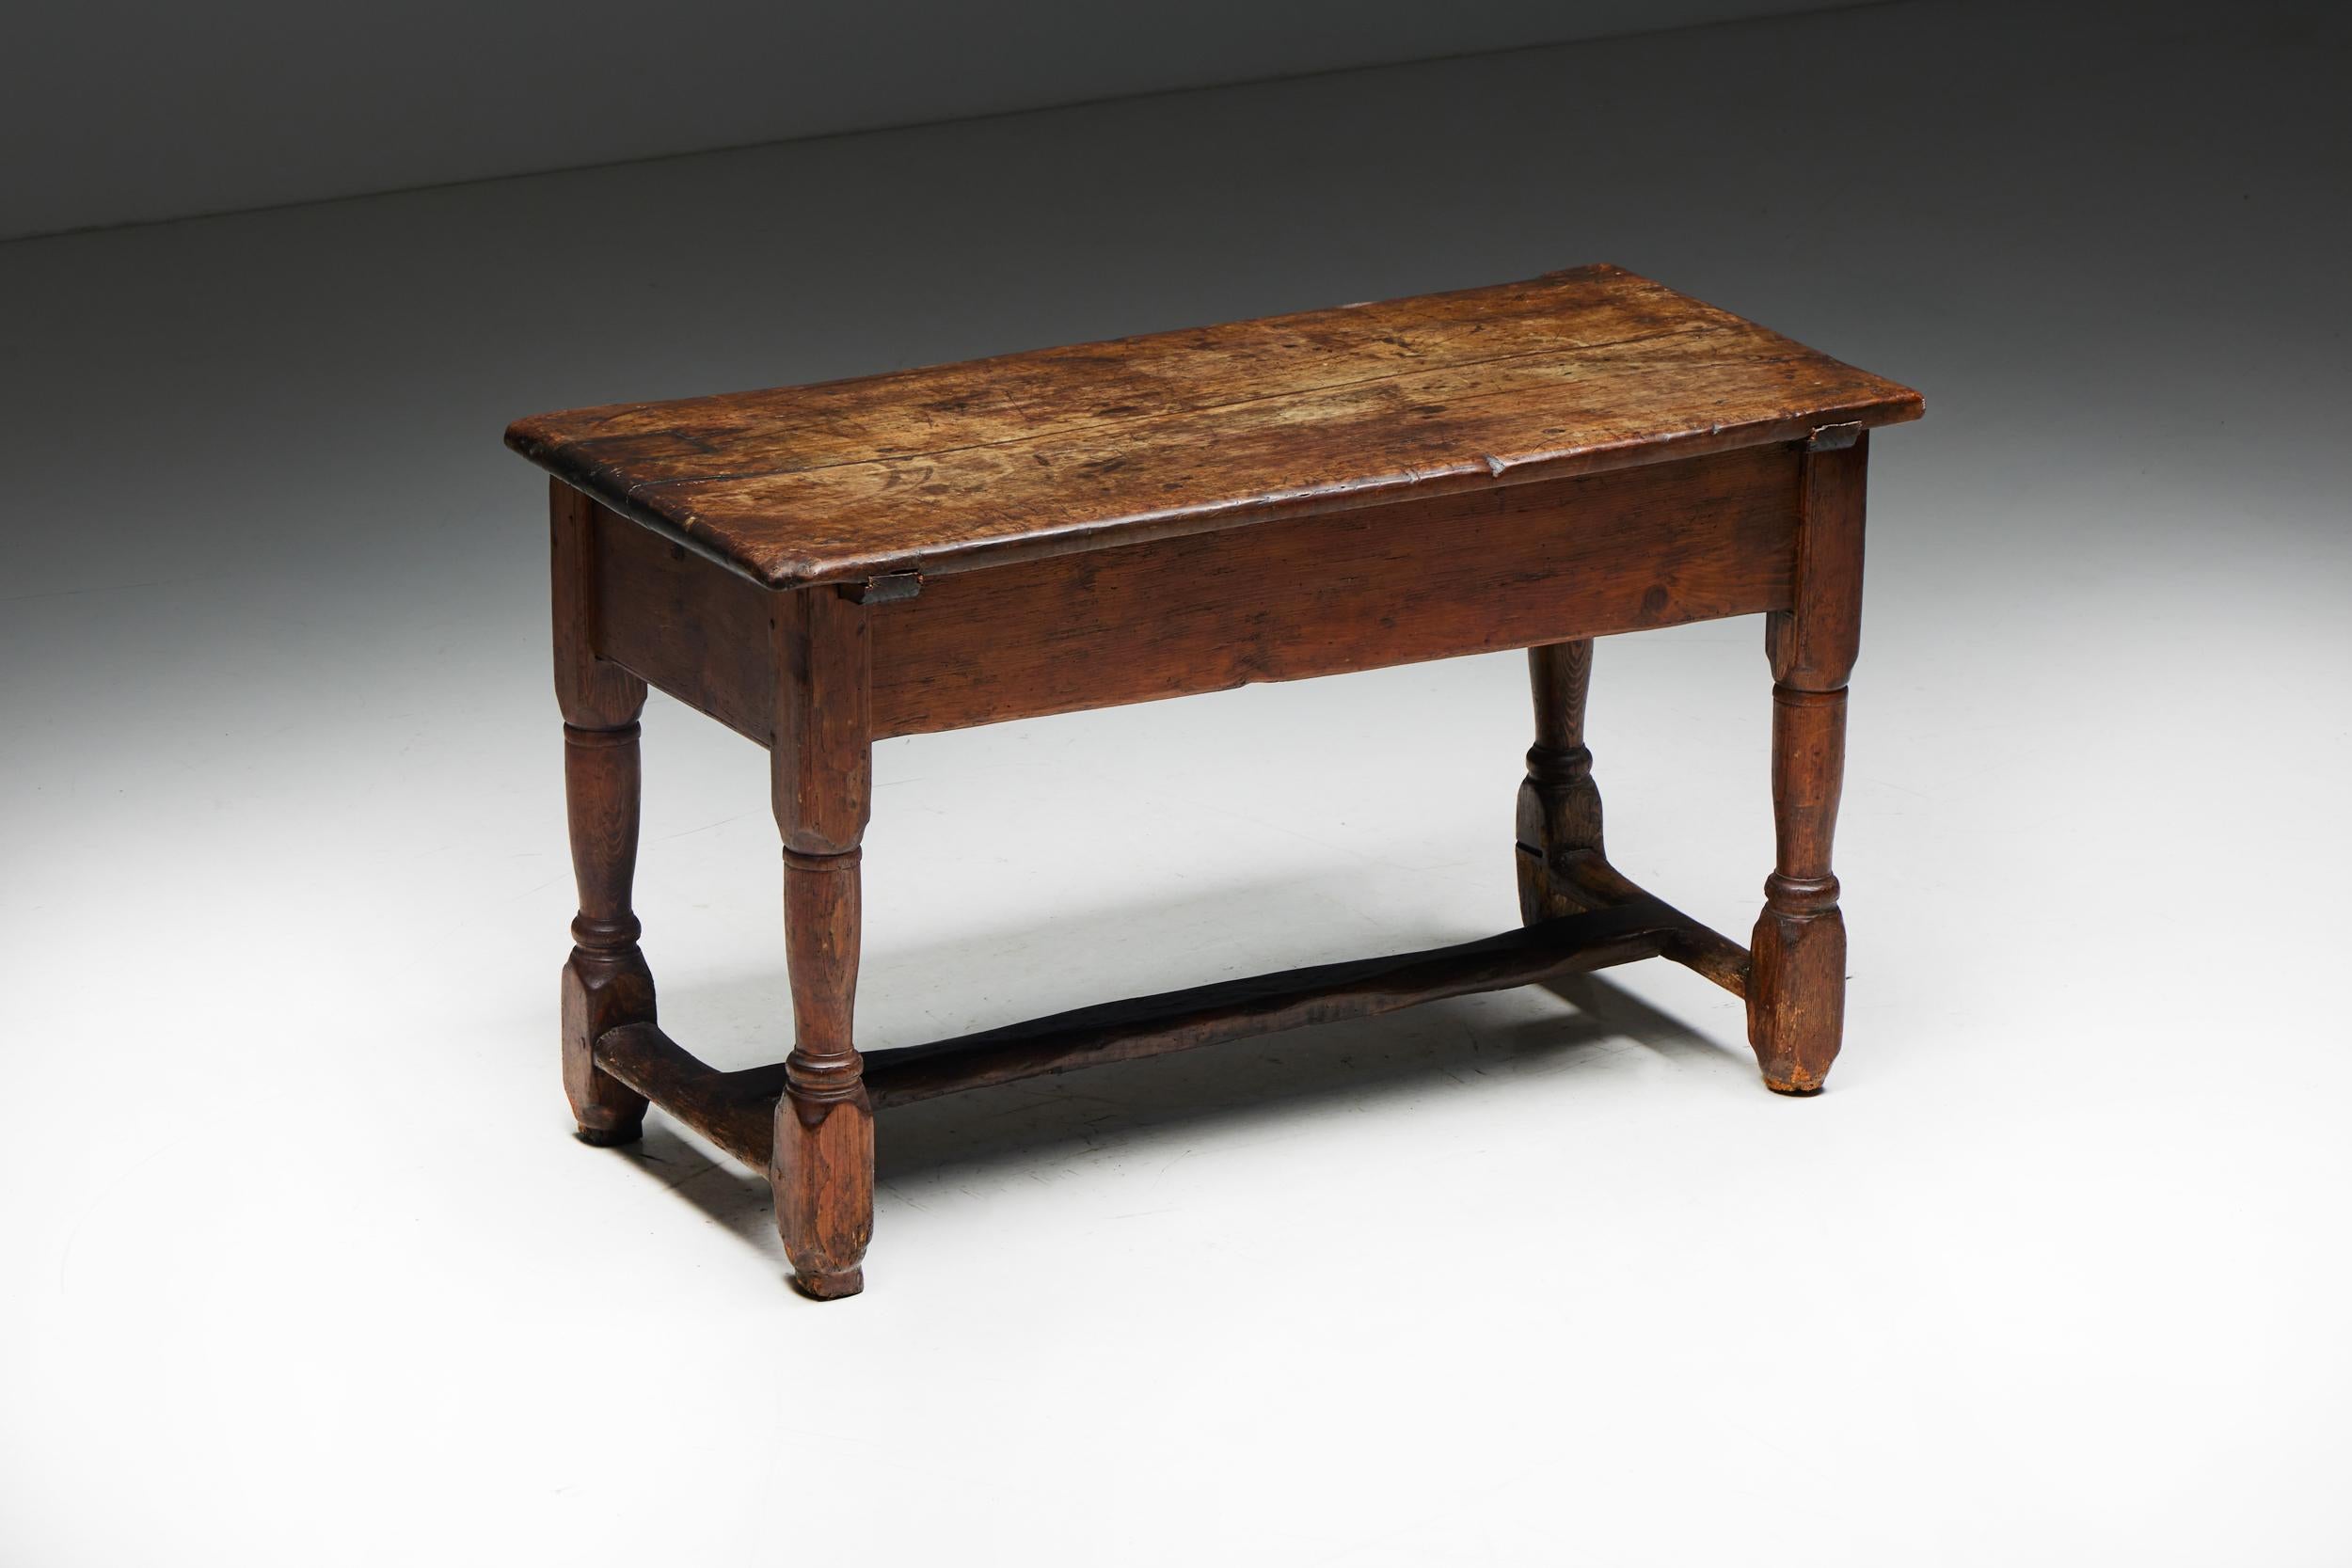 Rustic Art Populaire Writing Table, France, Early 20th Century For Sale 3